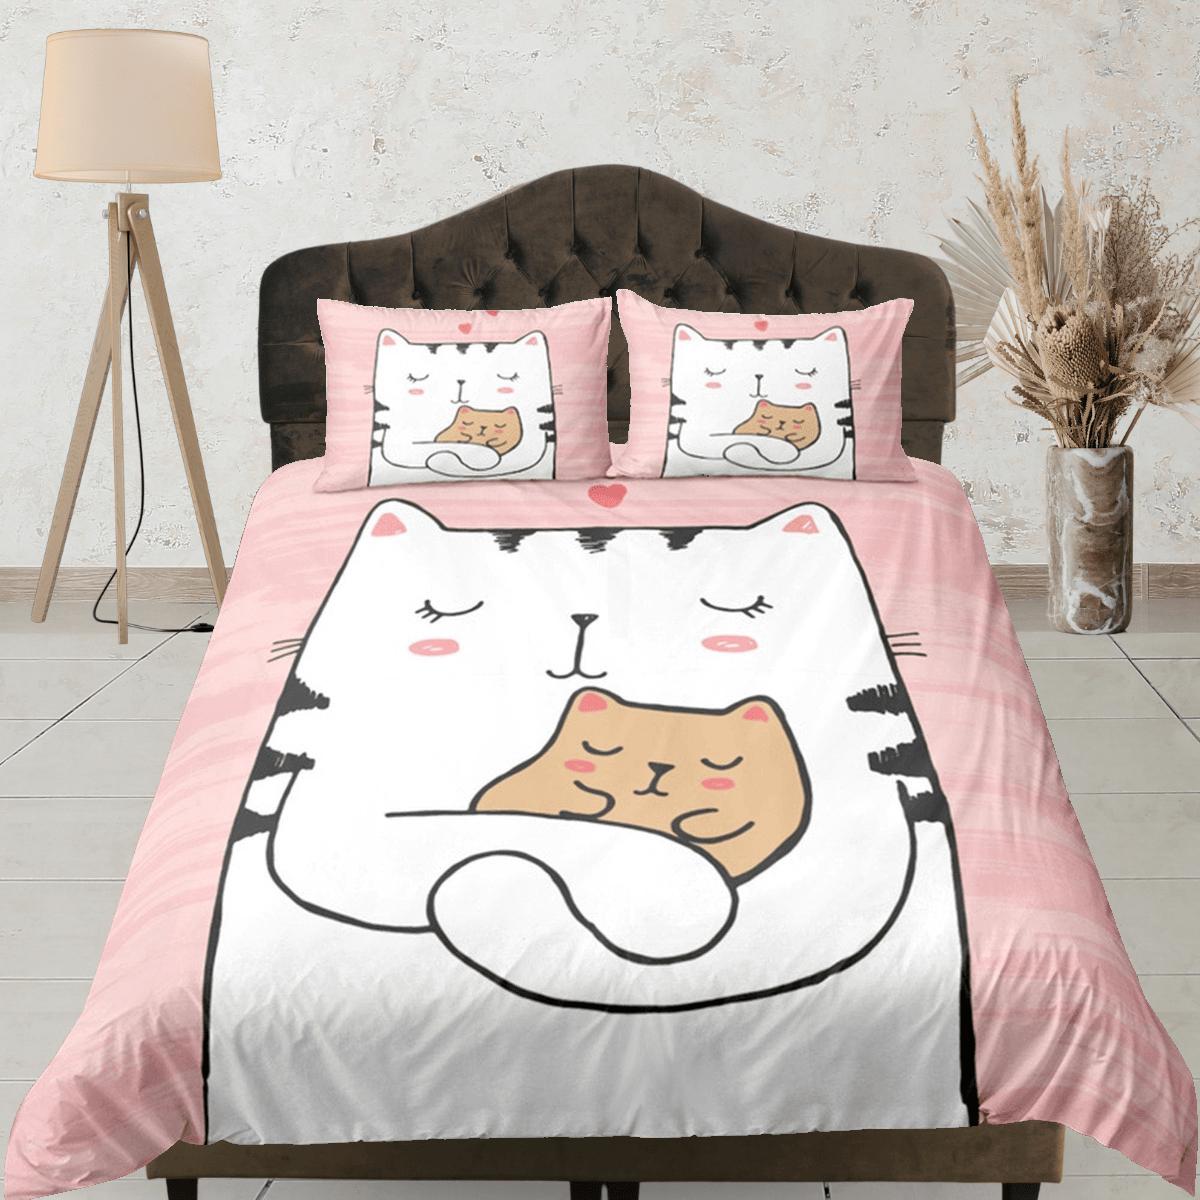 daintyduvet Sweet Cat and Kitten Cute Bedding, Toddler Bedding, Kids Duvet Cover Set, Baby Bedding, Baby Shower Doona Cover up to California King Size